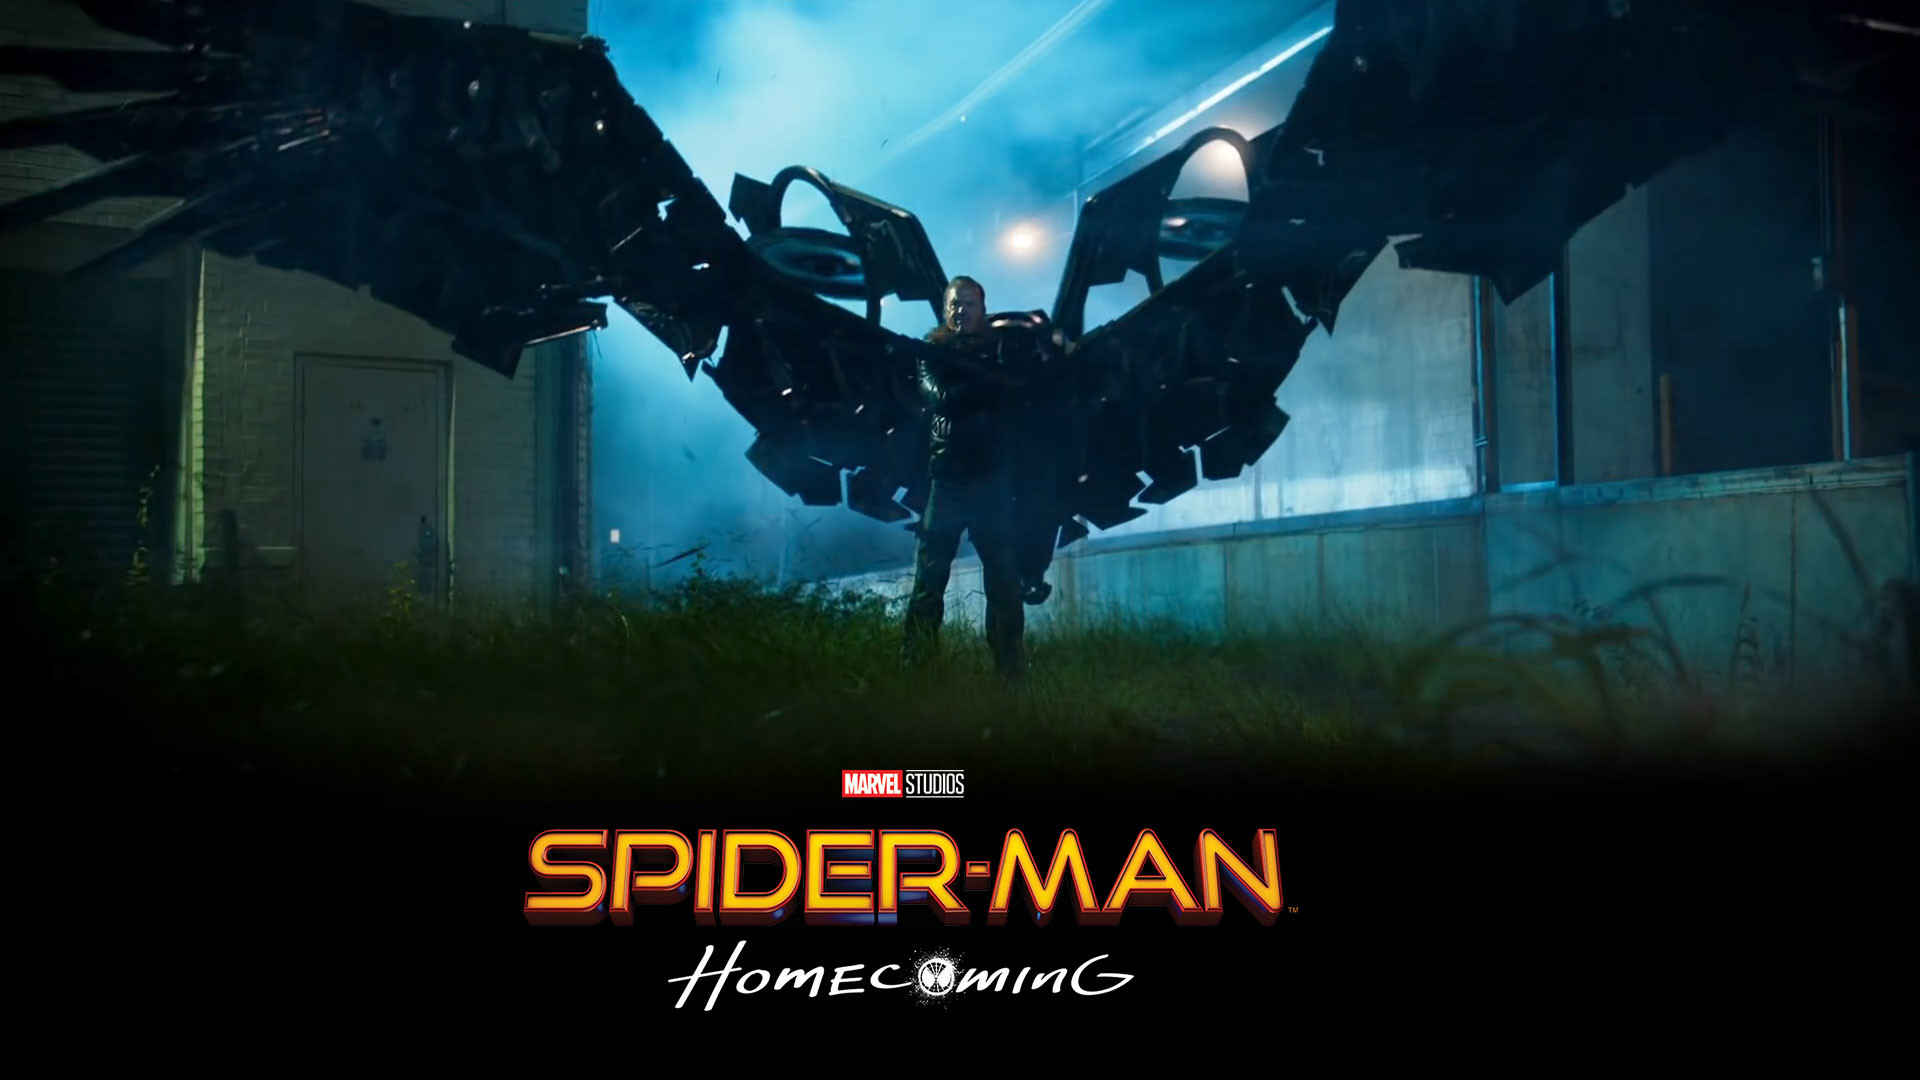 1920x1080 movie home wallpaper Spider-Man: Homecoming (2017) Movie Desktop Wallpapers  HD Quality